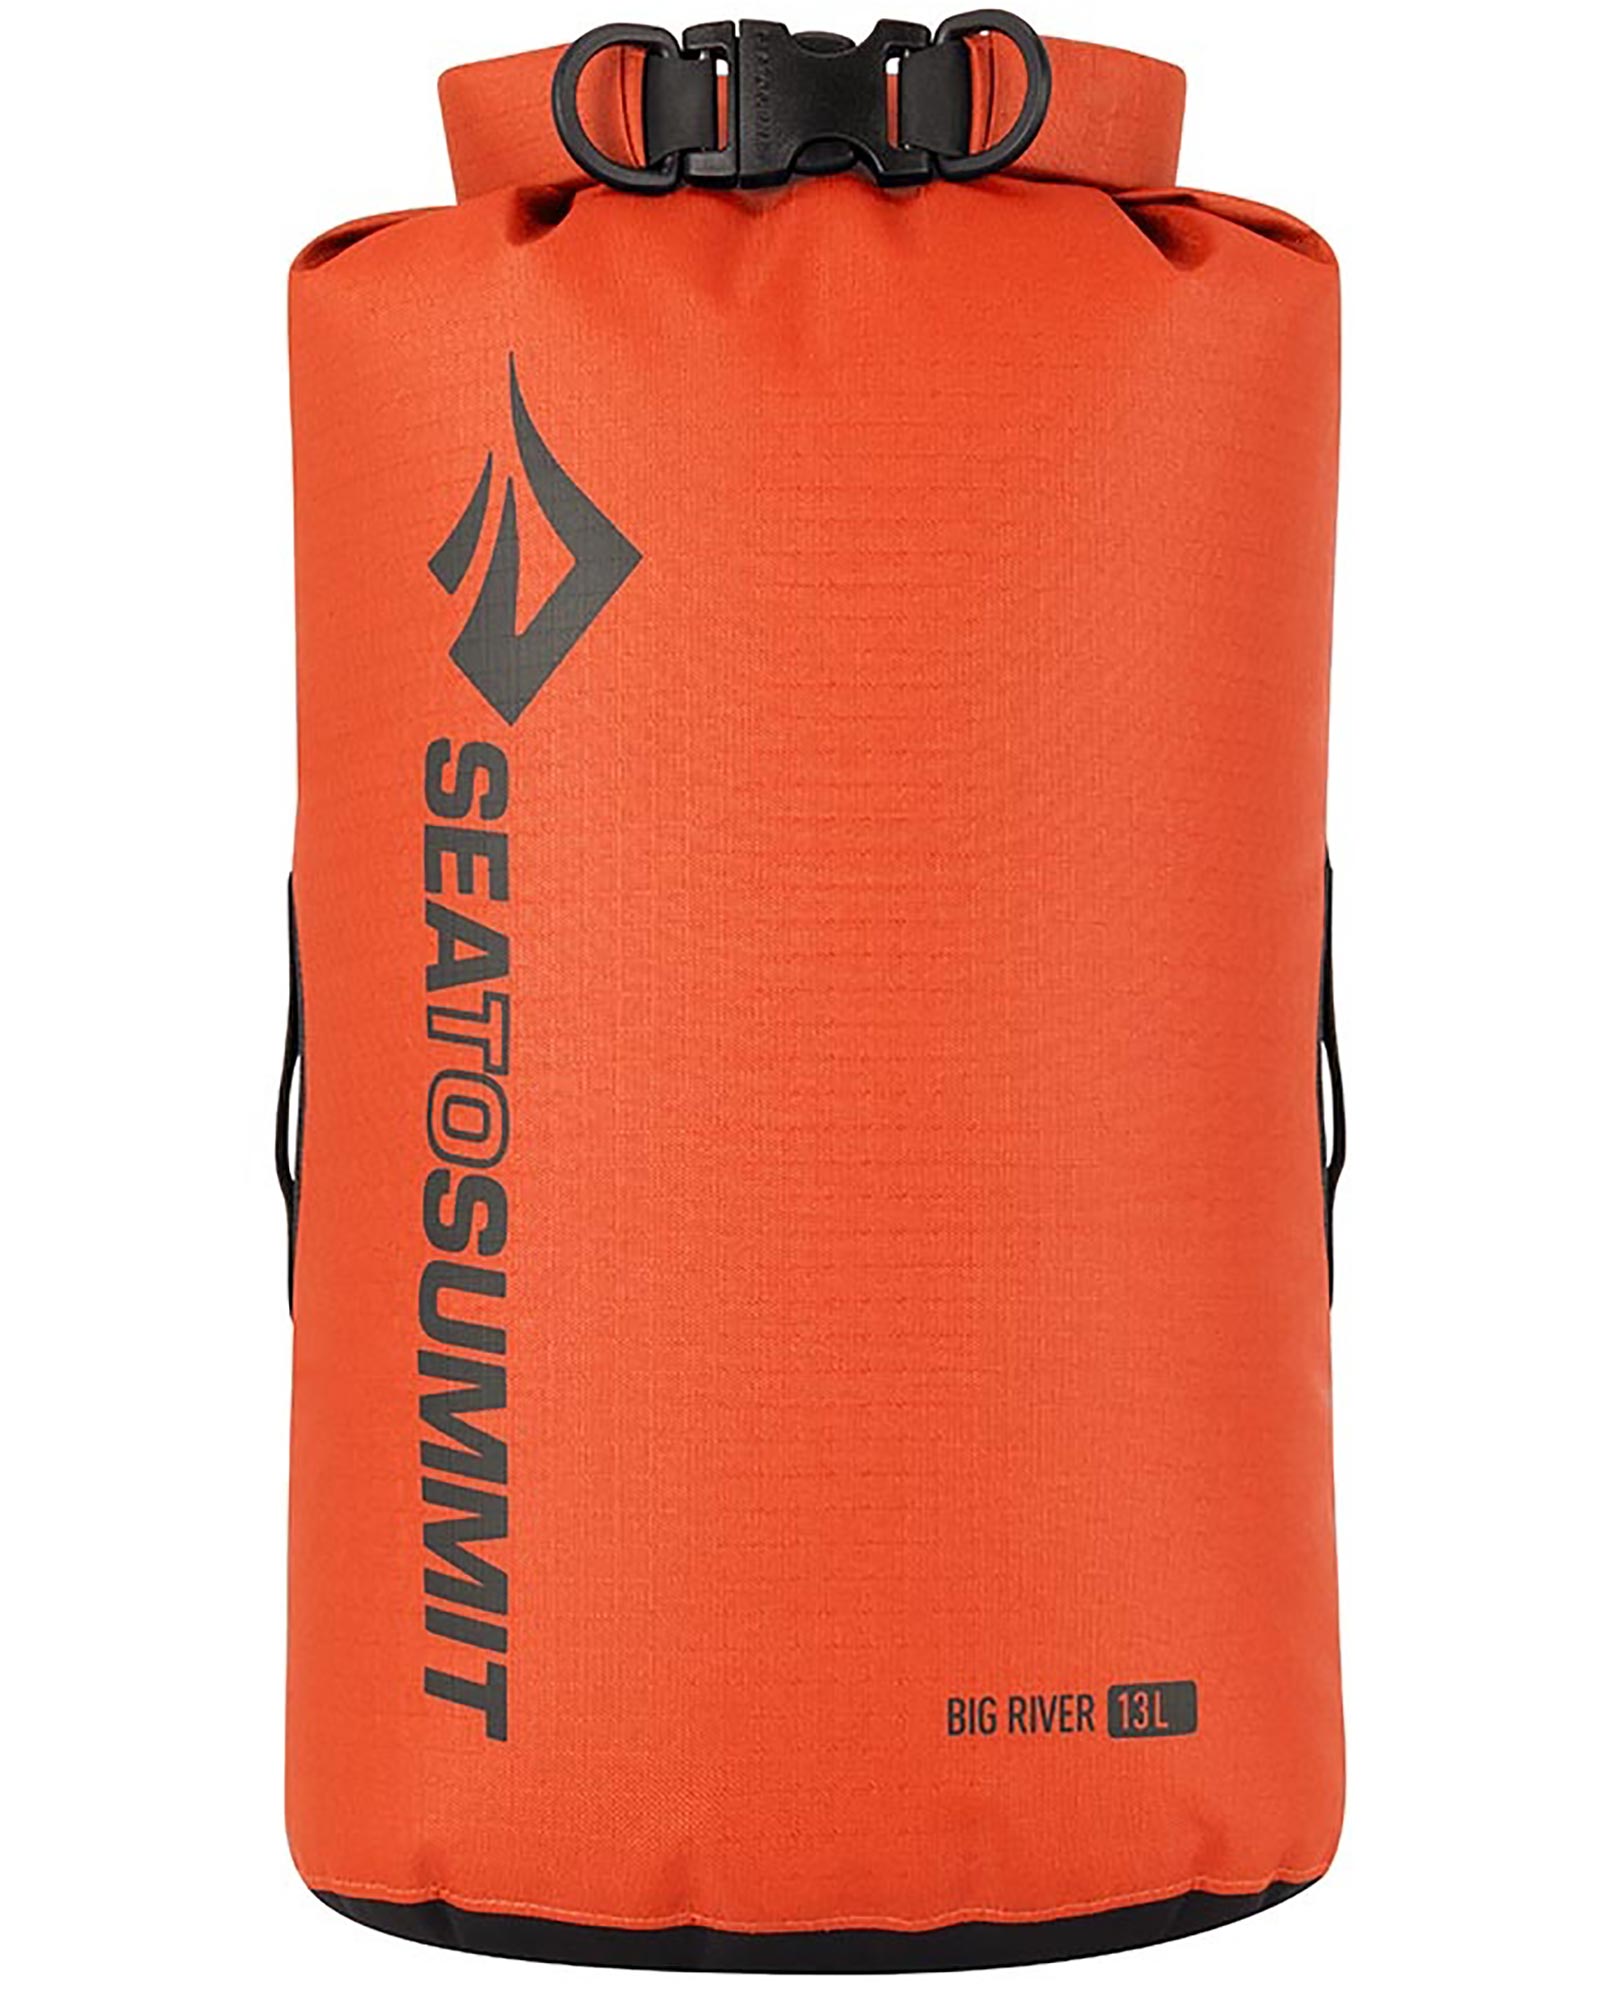 Product image of Sea to Summit Big River Dry Bag 13L